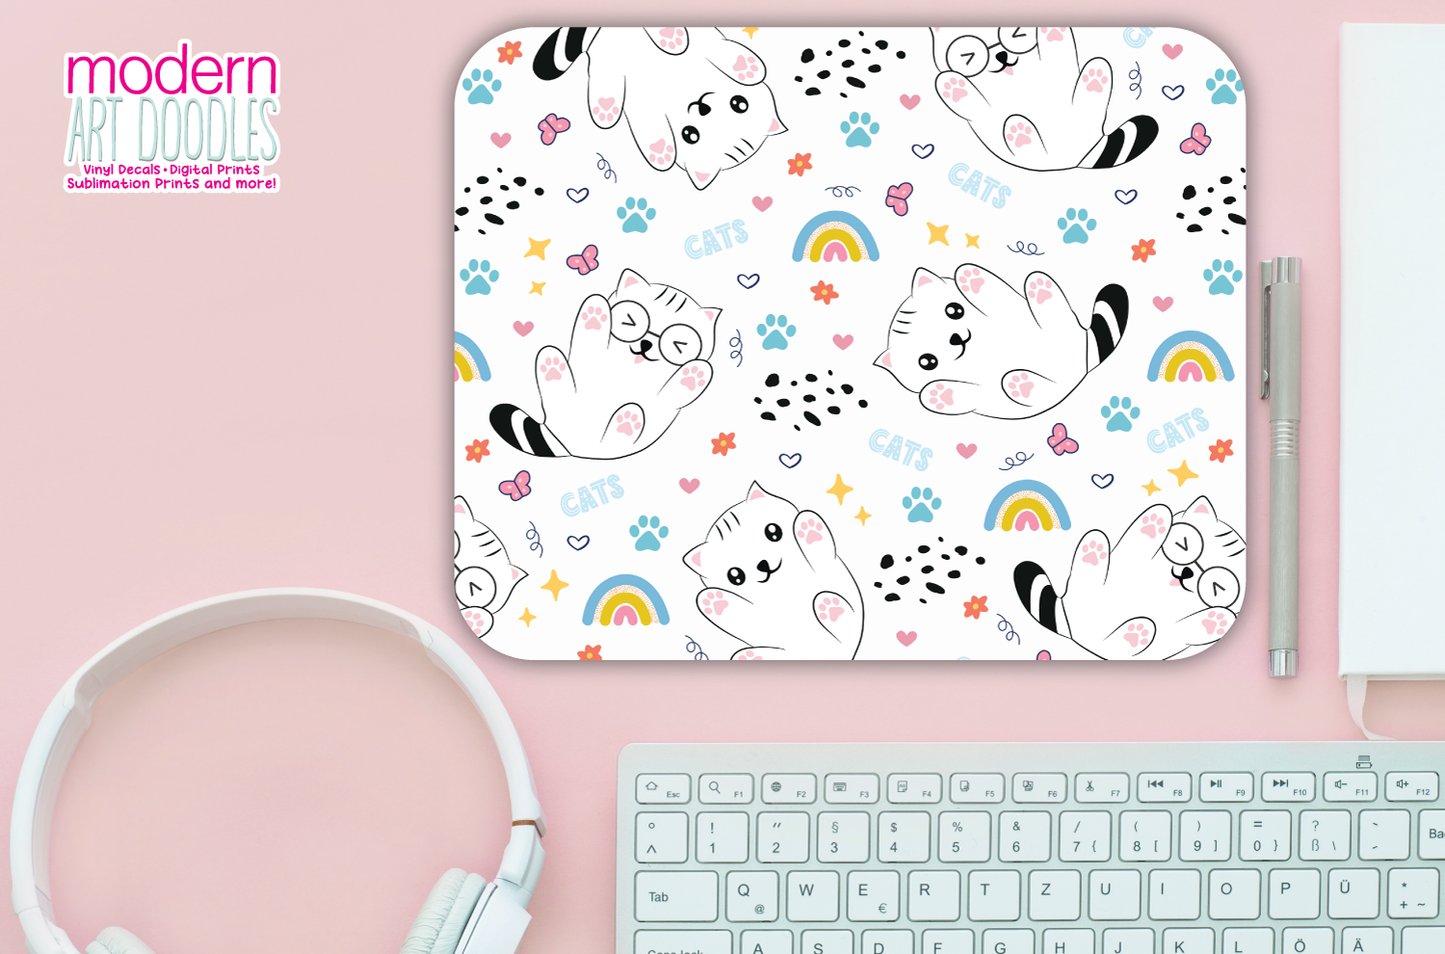 Rainbow Cats Kitty Cute Kawaii Gaming Mouse pad, Computer Keyboard Office Accessories, Cute Office Decor